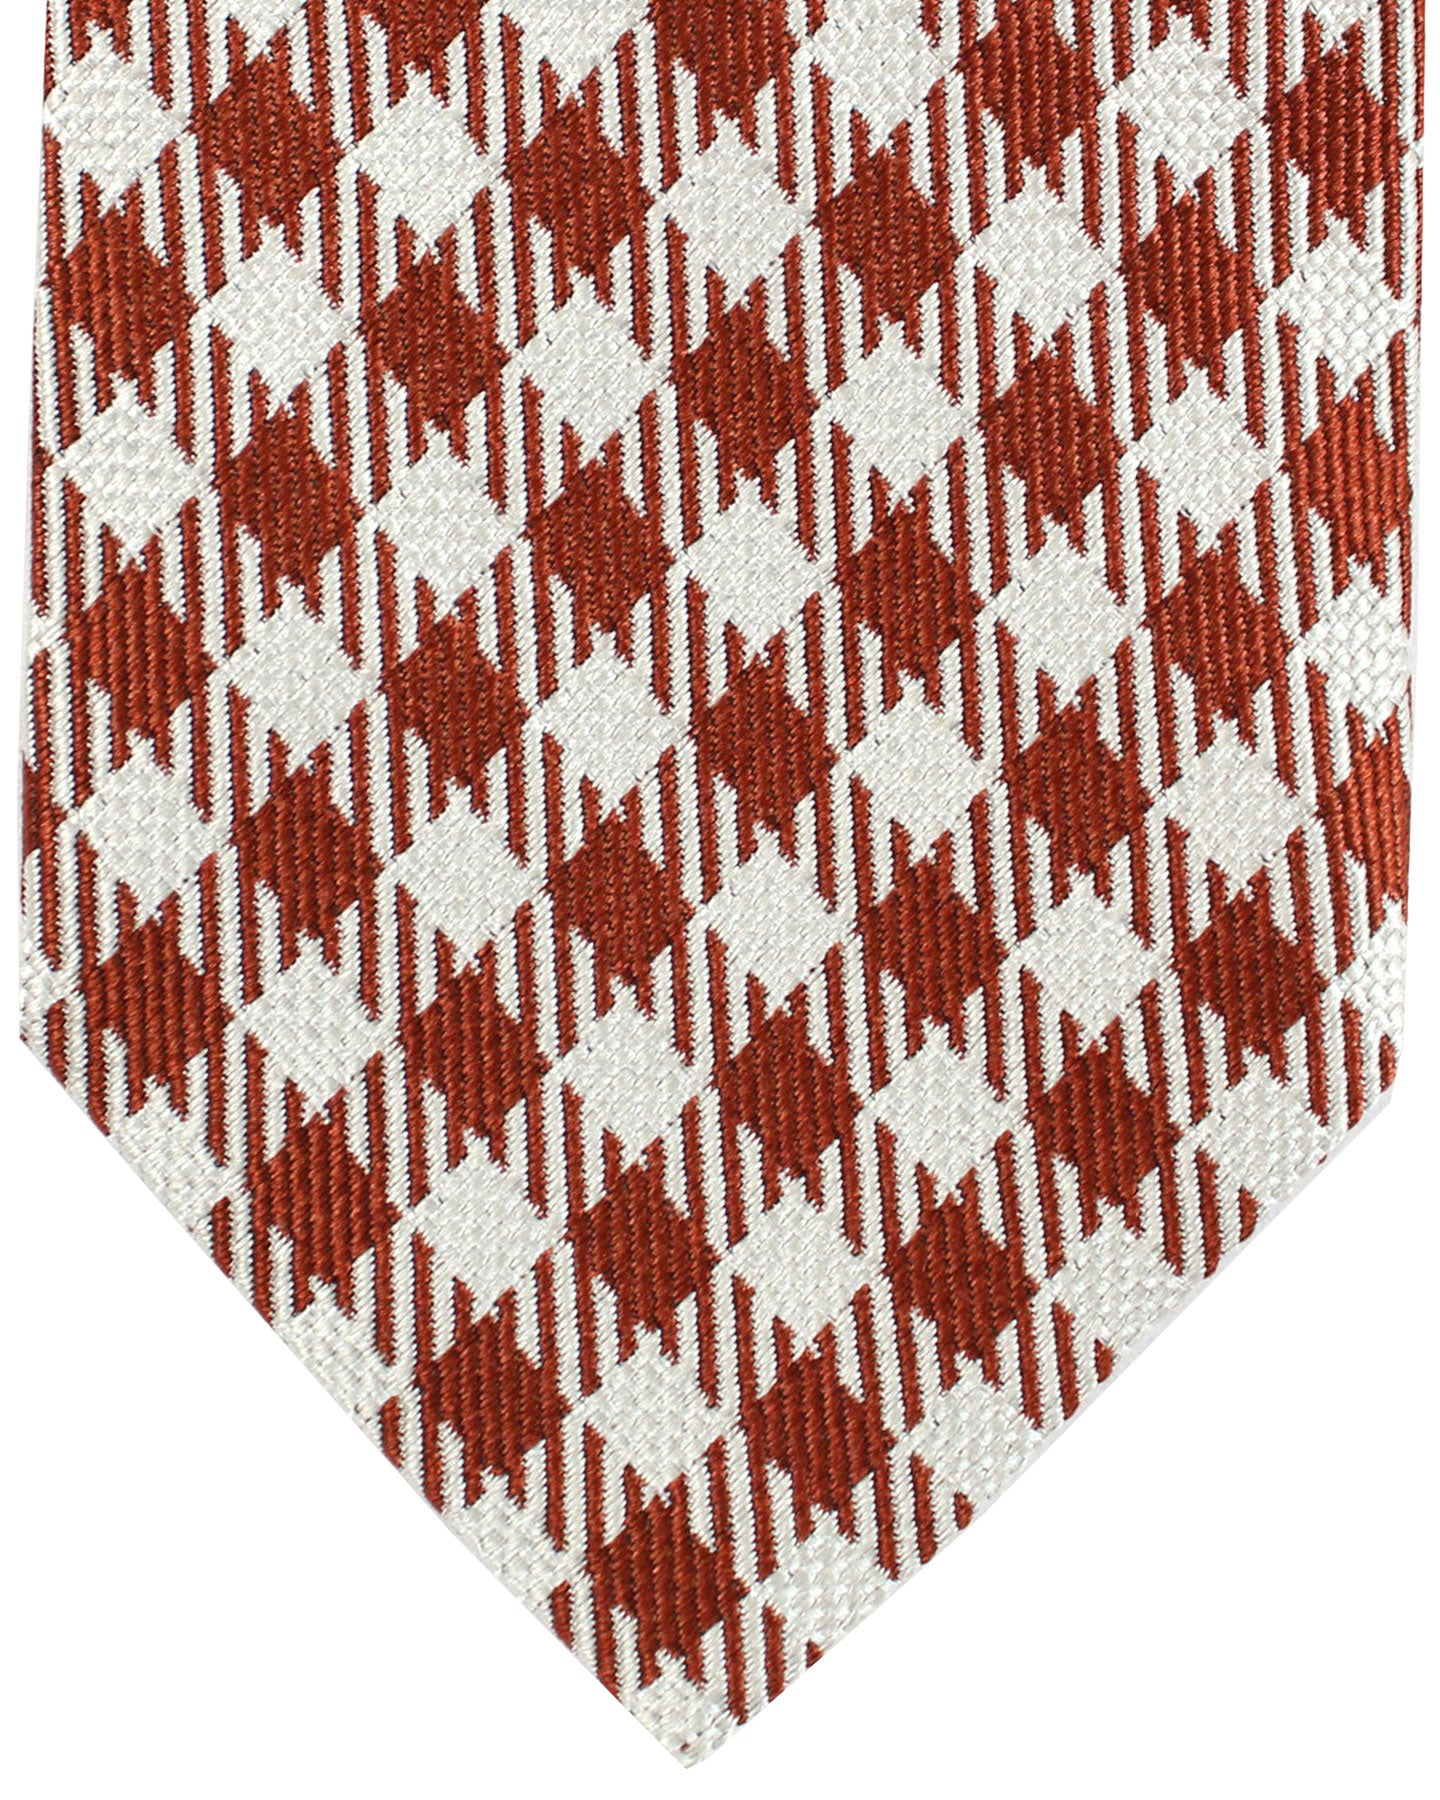 Tom Ford Tie Maroon Silver Gingham